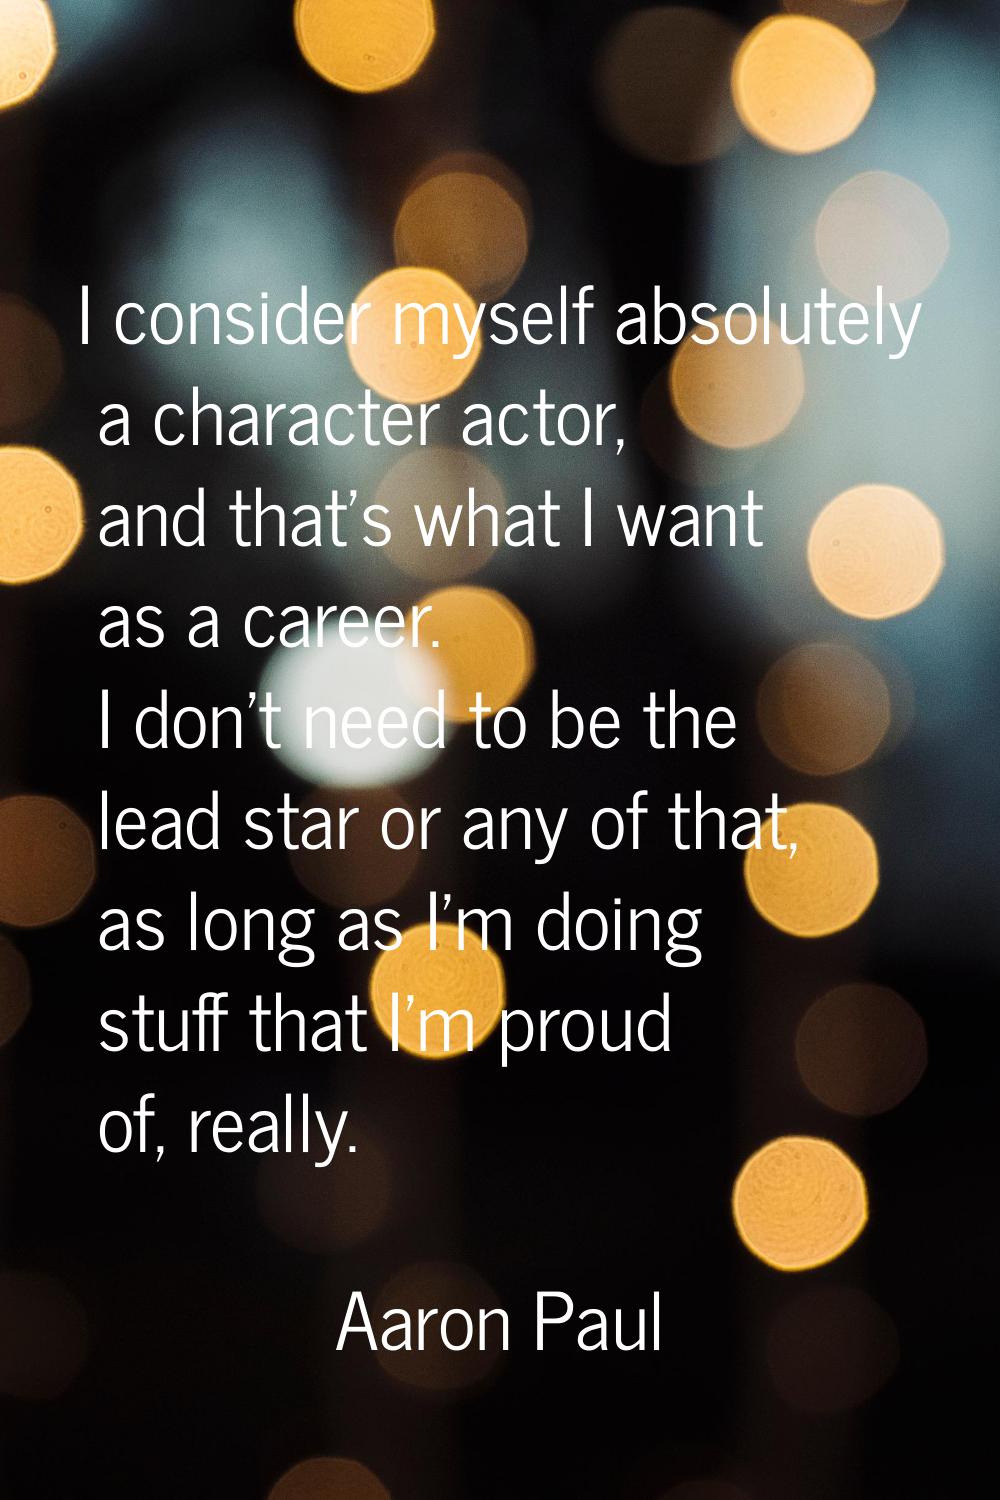 I consider myself absolutely a character actor, and that's what I want as a career. I don't need to